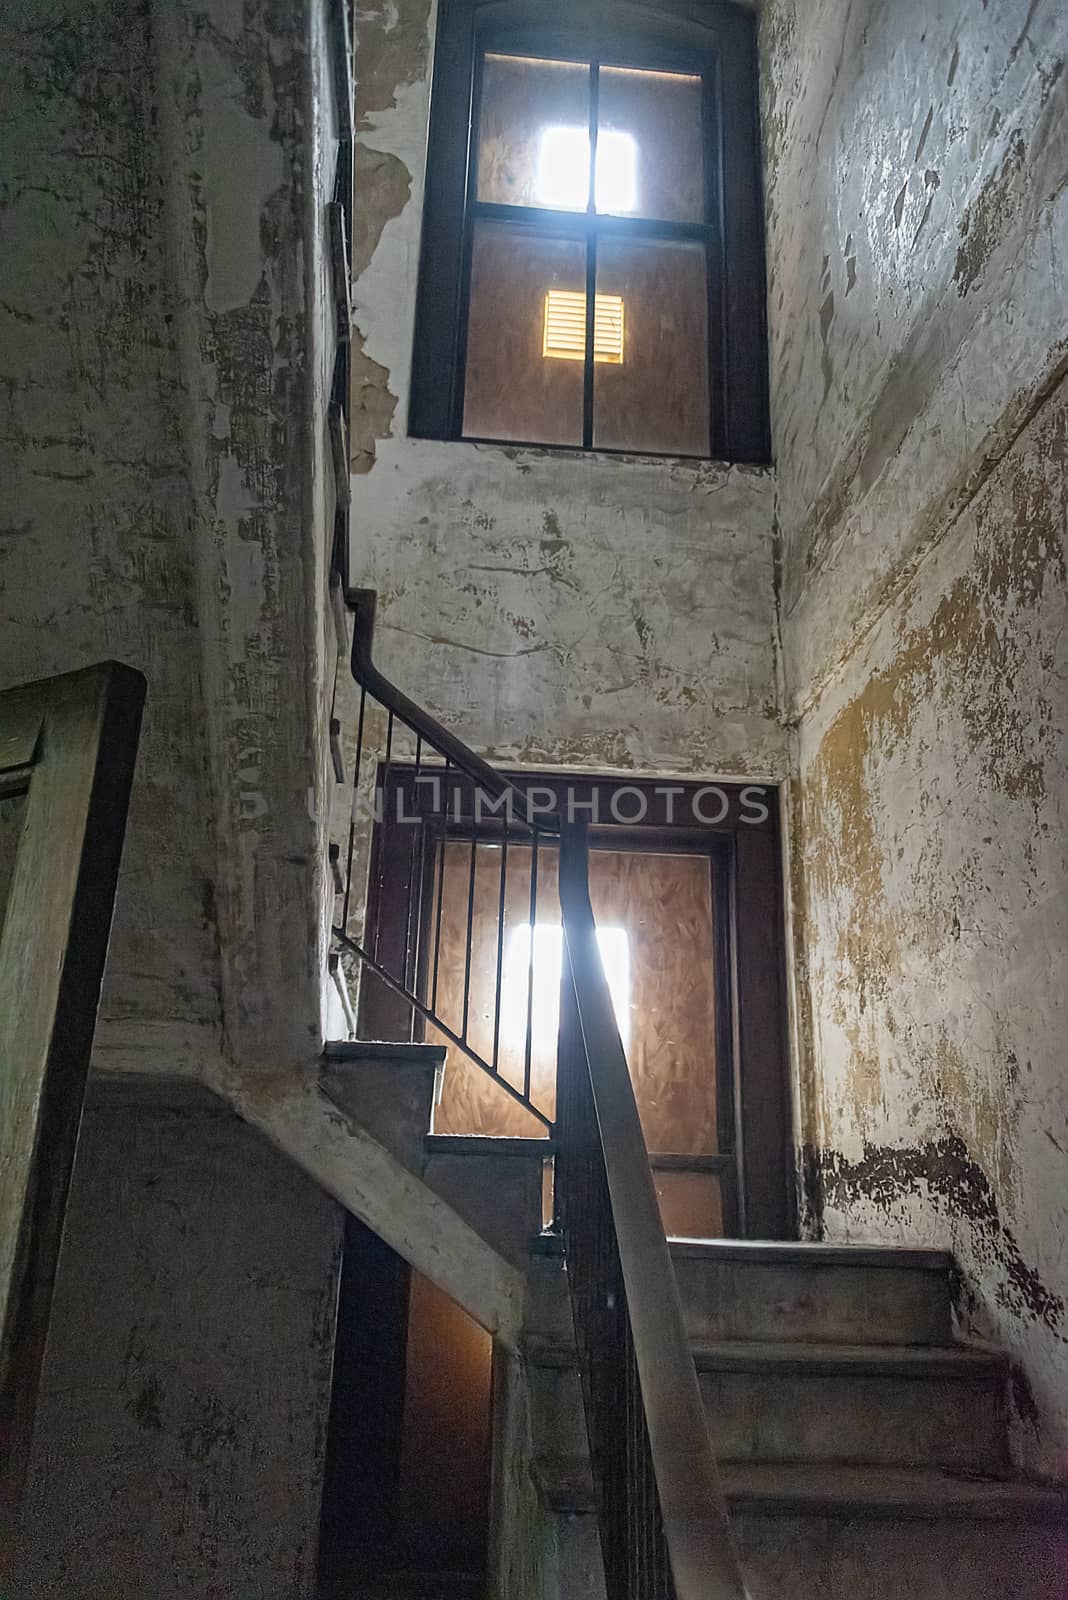 USA, New York, Ellis Island - May 2019: View up wooden stair case in boarded up, dilapidated house